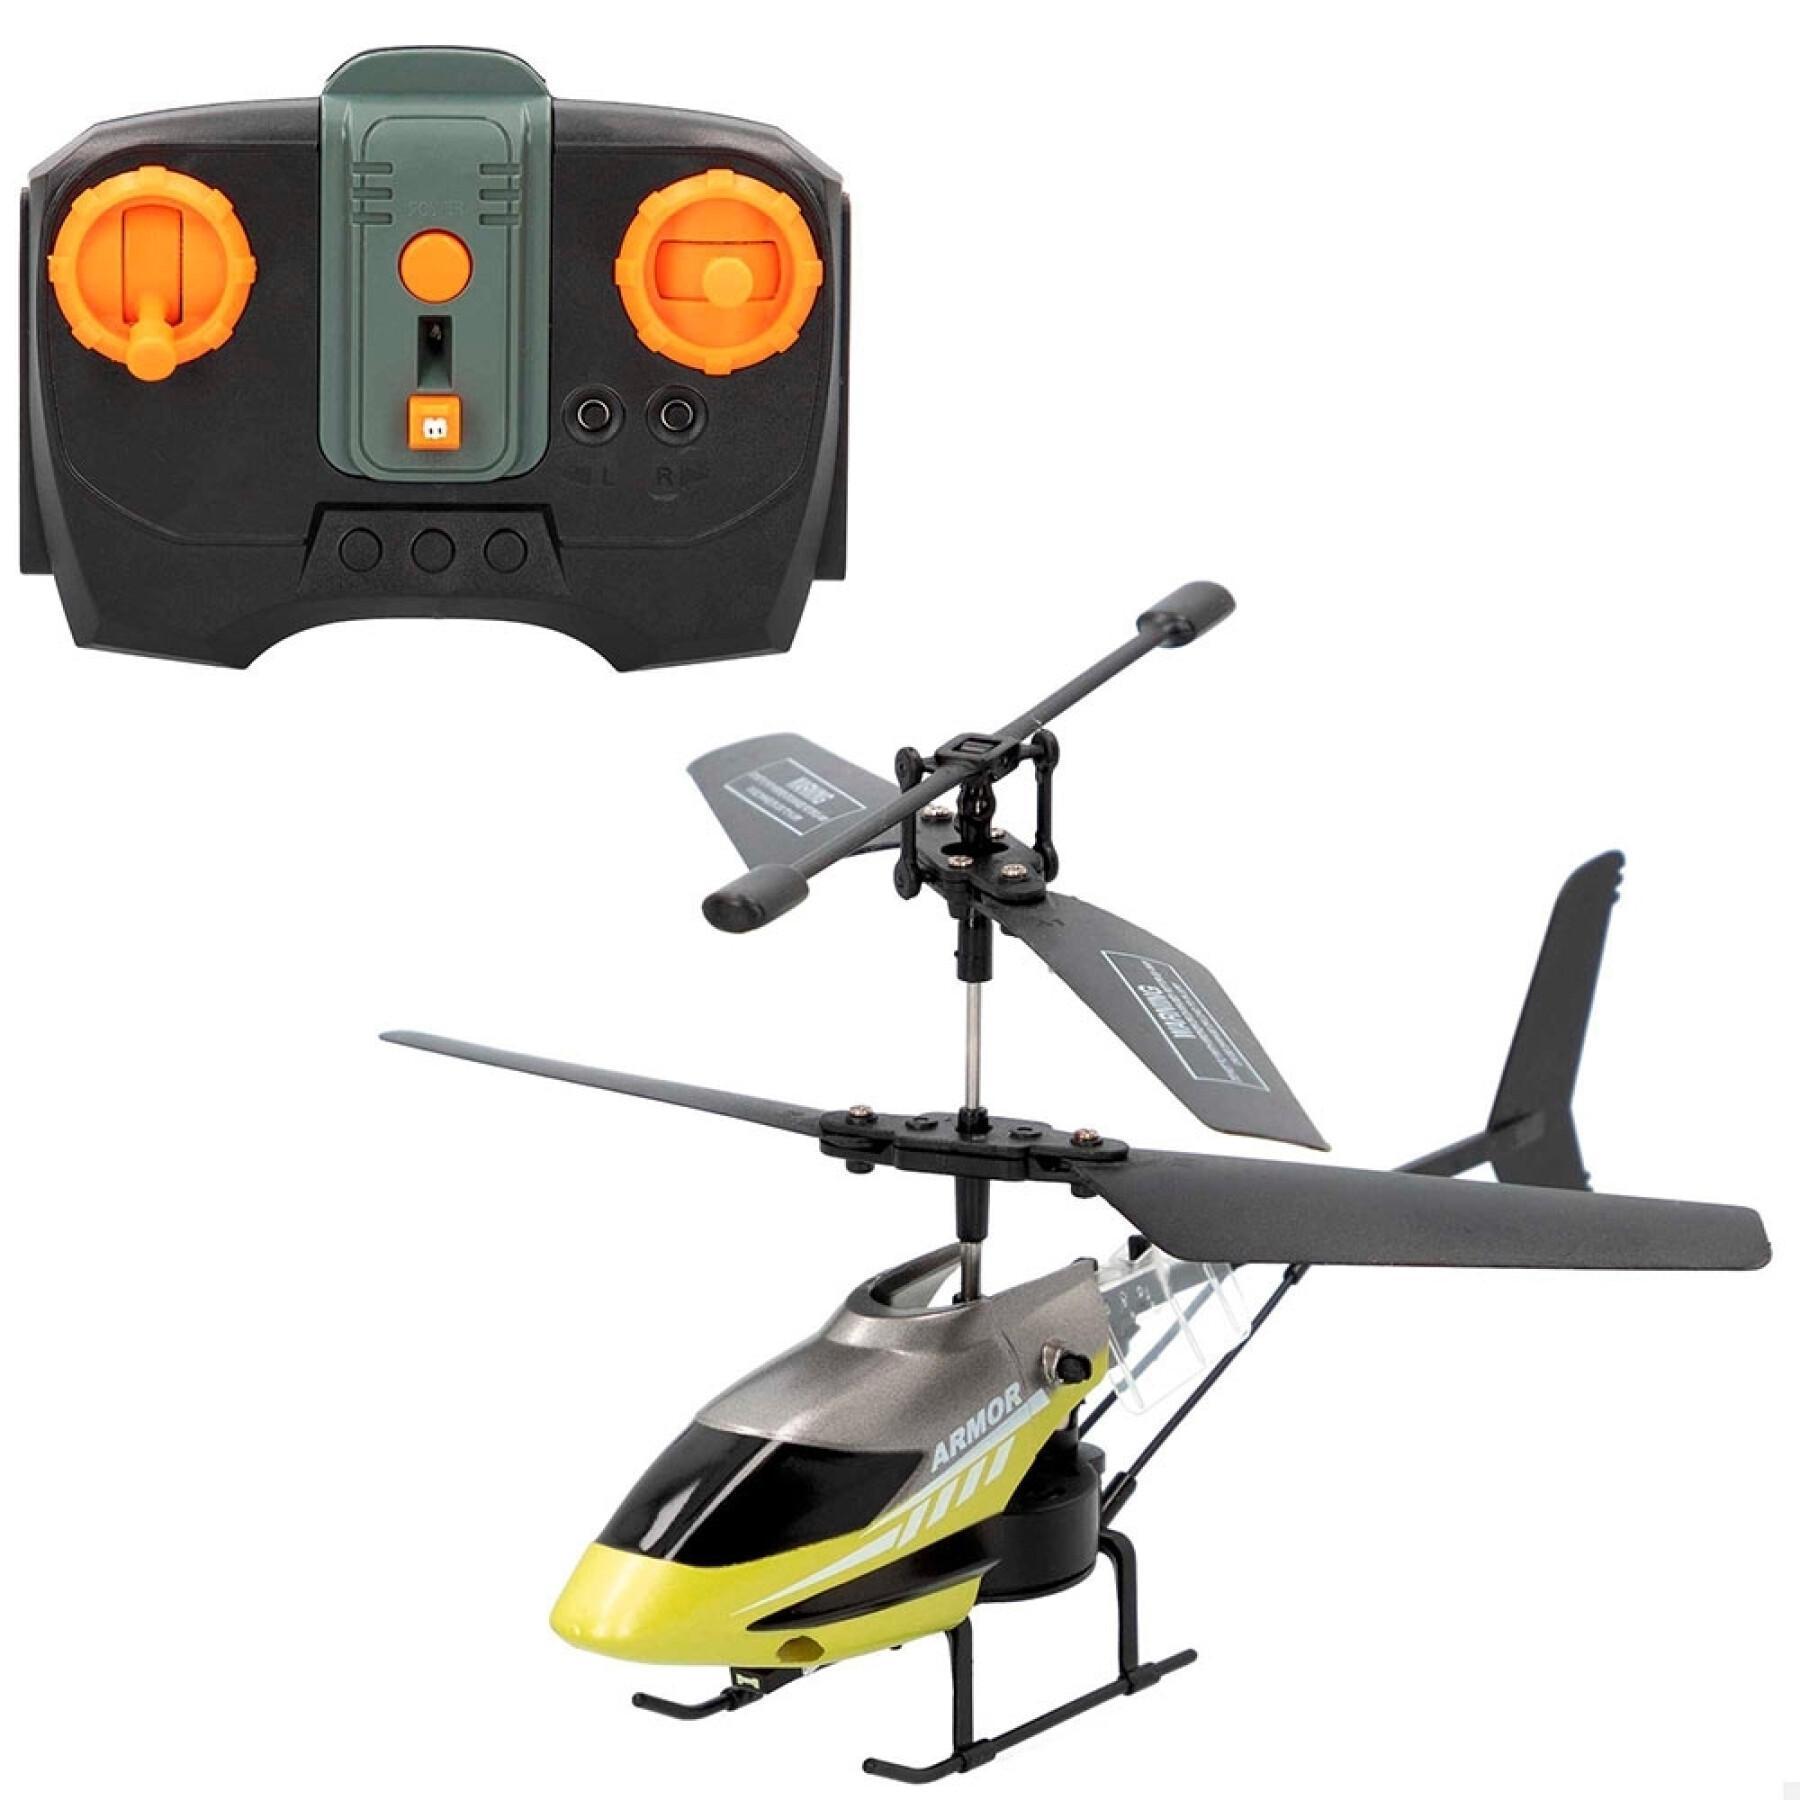 Infrared remote controlled helicopter with two channels Speed & Go